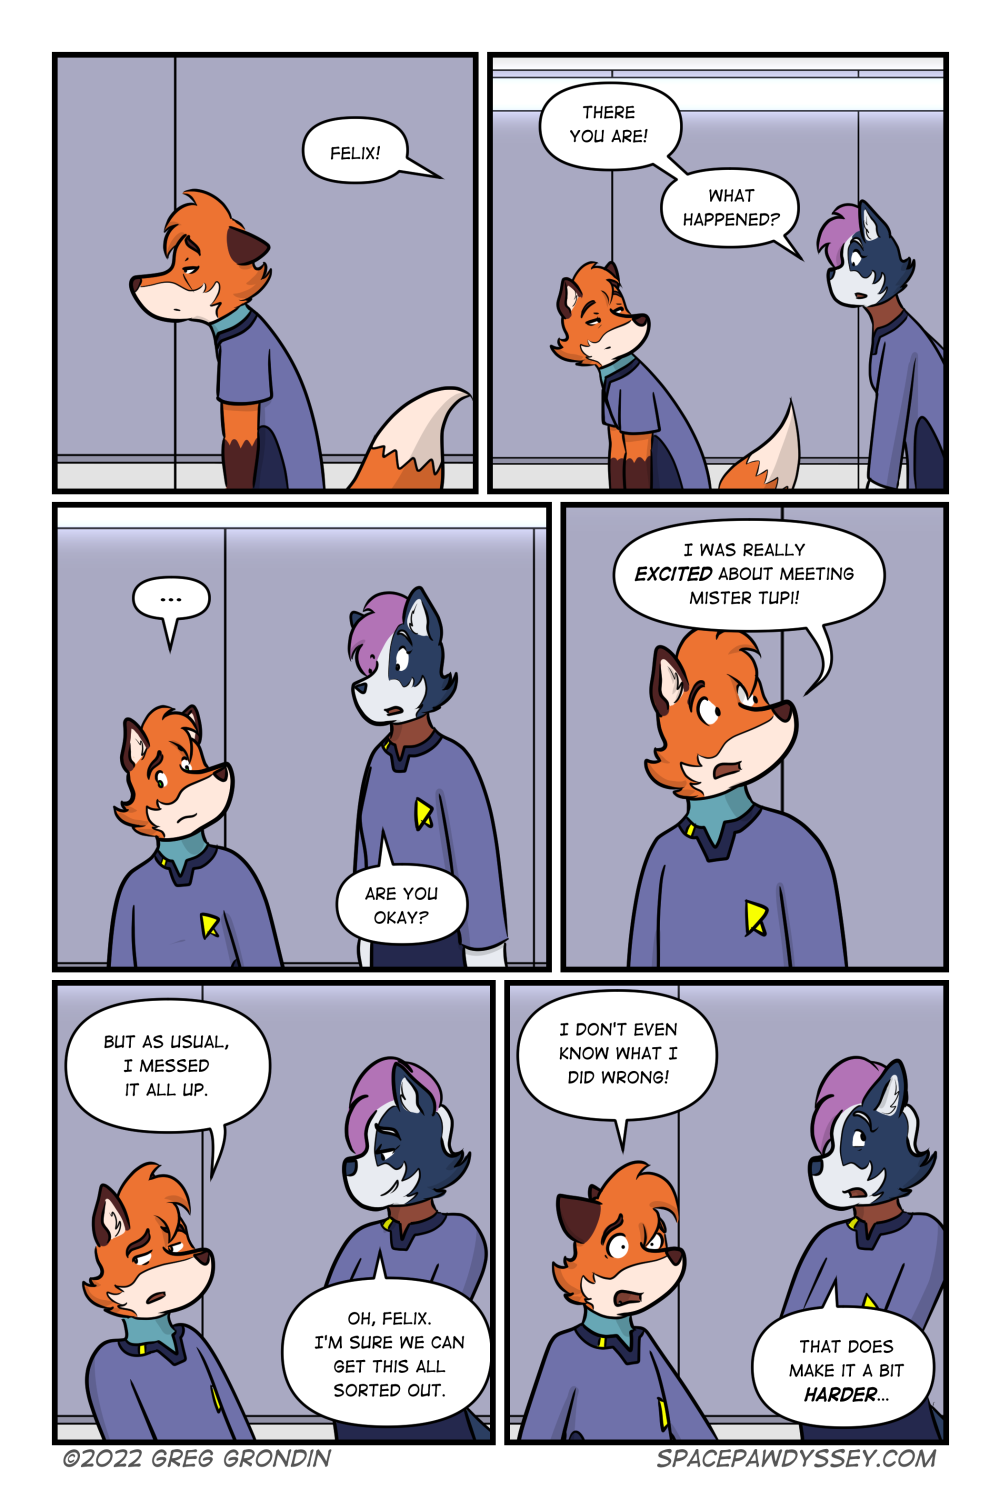 Space Pawdyssey #544